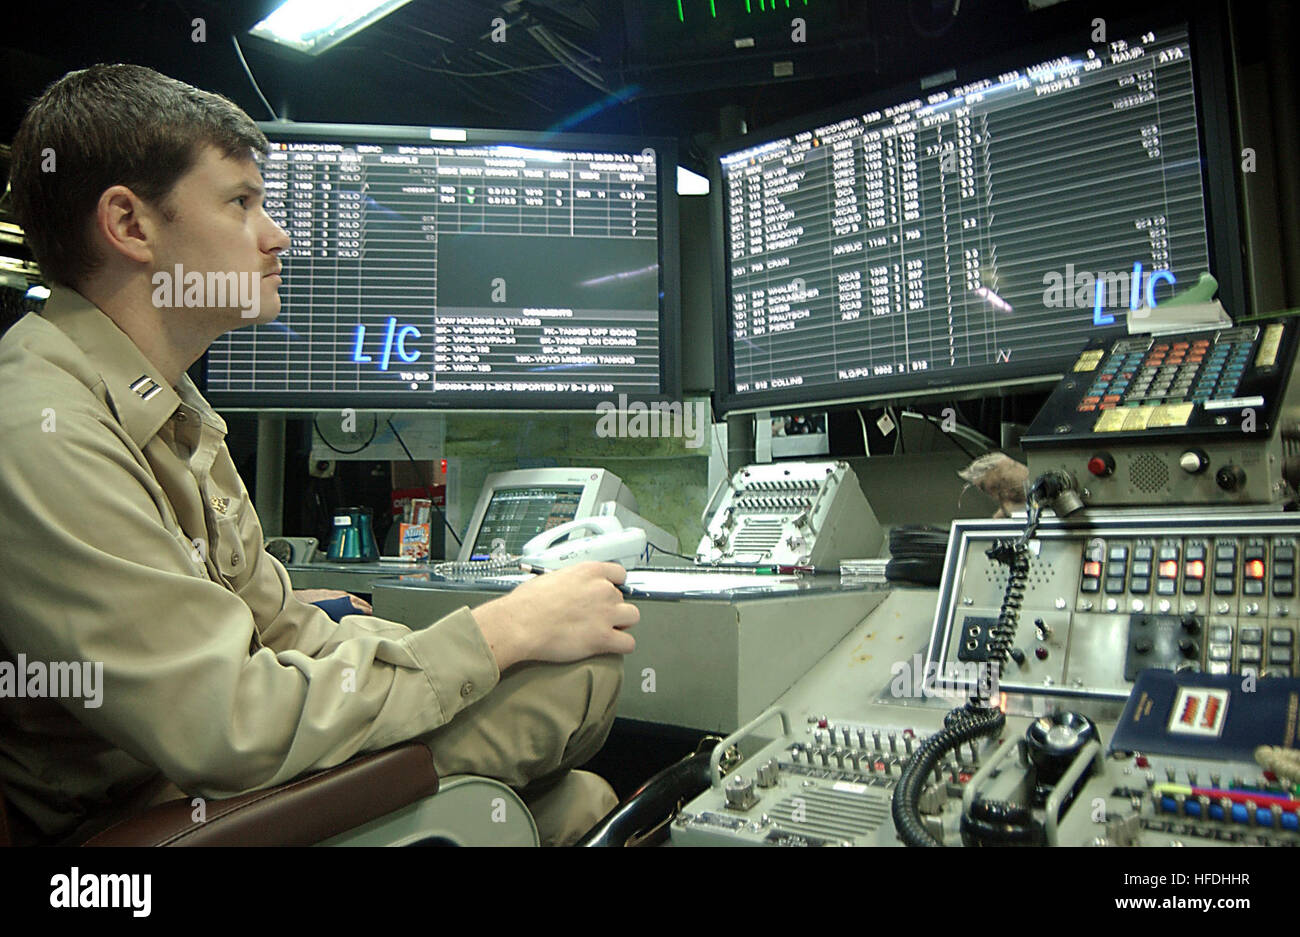 020801-N-7871M-001 At sea aboard USS George Washington  (CVN 73) Aug. 1, 2002 -- Lt. Mark Zinser from San Diego, Calif., uses the aircraft carrier's integrated shipboard information system to monitor aircraft operating in the area while standing watch in the Carrier Air Traffic Control Center (CATCC). Washington and Carrier Air Wing One Seven (CVW-17) are on a regularly scheduled deployment conducting combat missions in support of Operation Enduring Freedom.  U.S. Navy photo by Photographer's Mate Airman Andrew Morrow.  (RELEASED) US Navy 020801-N-7871M-001 Lt. Zinser monitors aircraft operati Stock Photo